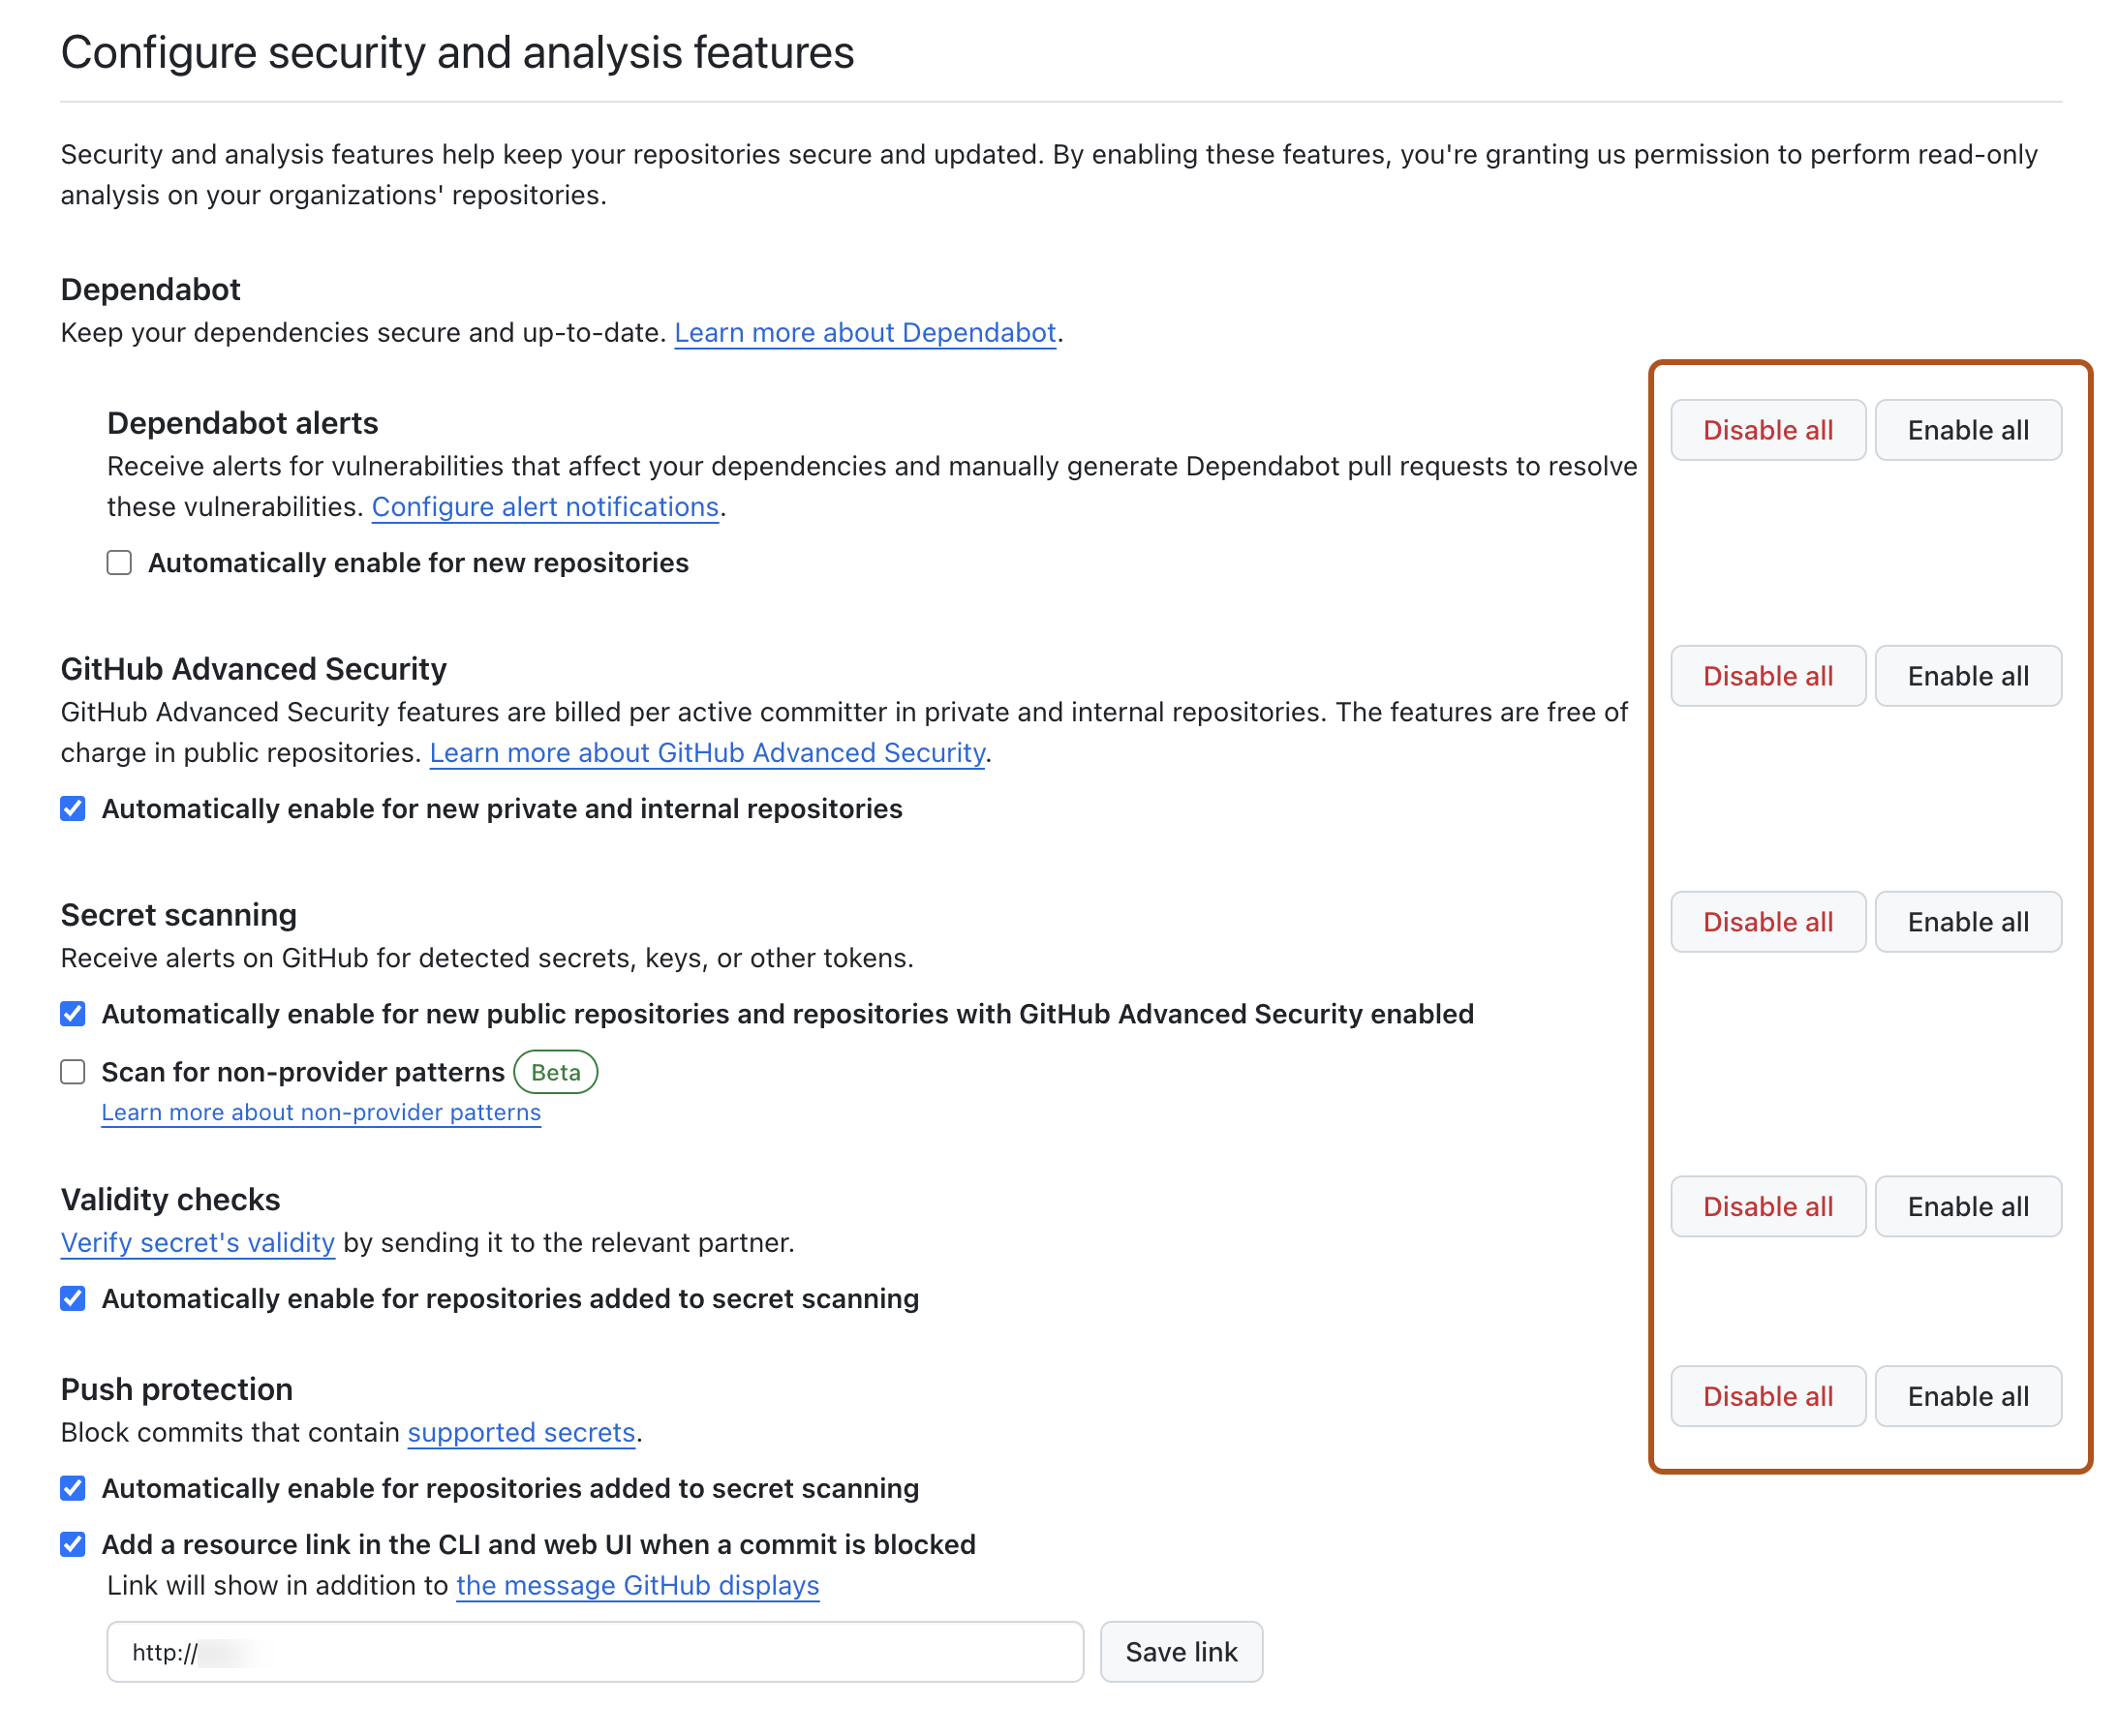 Screenshot of the "Configure security and analysis features" section of the enterprise settings. To the right of each setting are "Enable all" and "Disable all" buttons, which are outlined in dark orange.